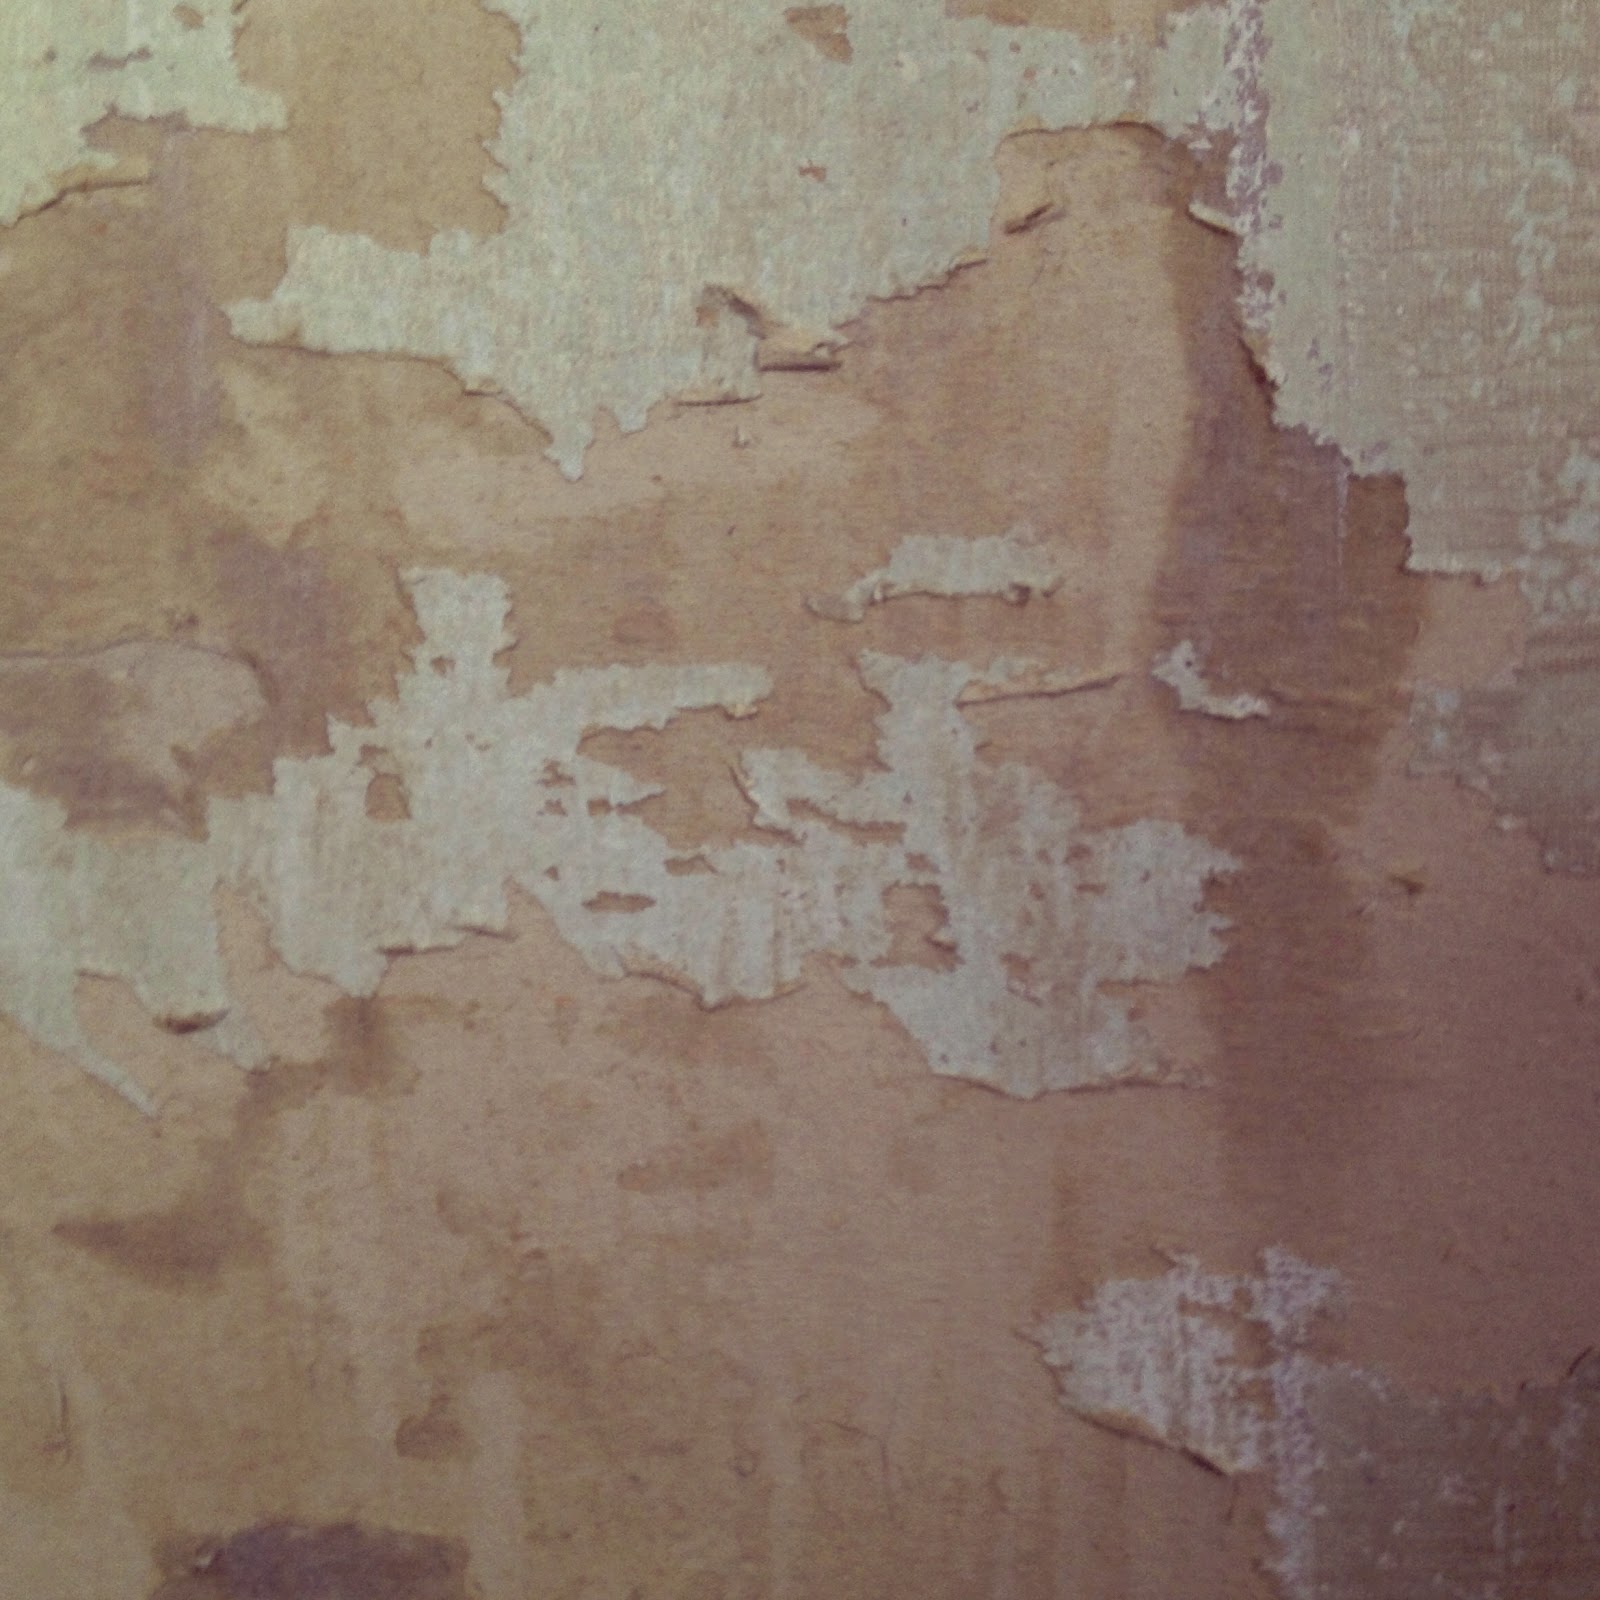 ... going along, scraping the old 70's wallpaper and sizing off the wall